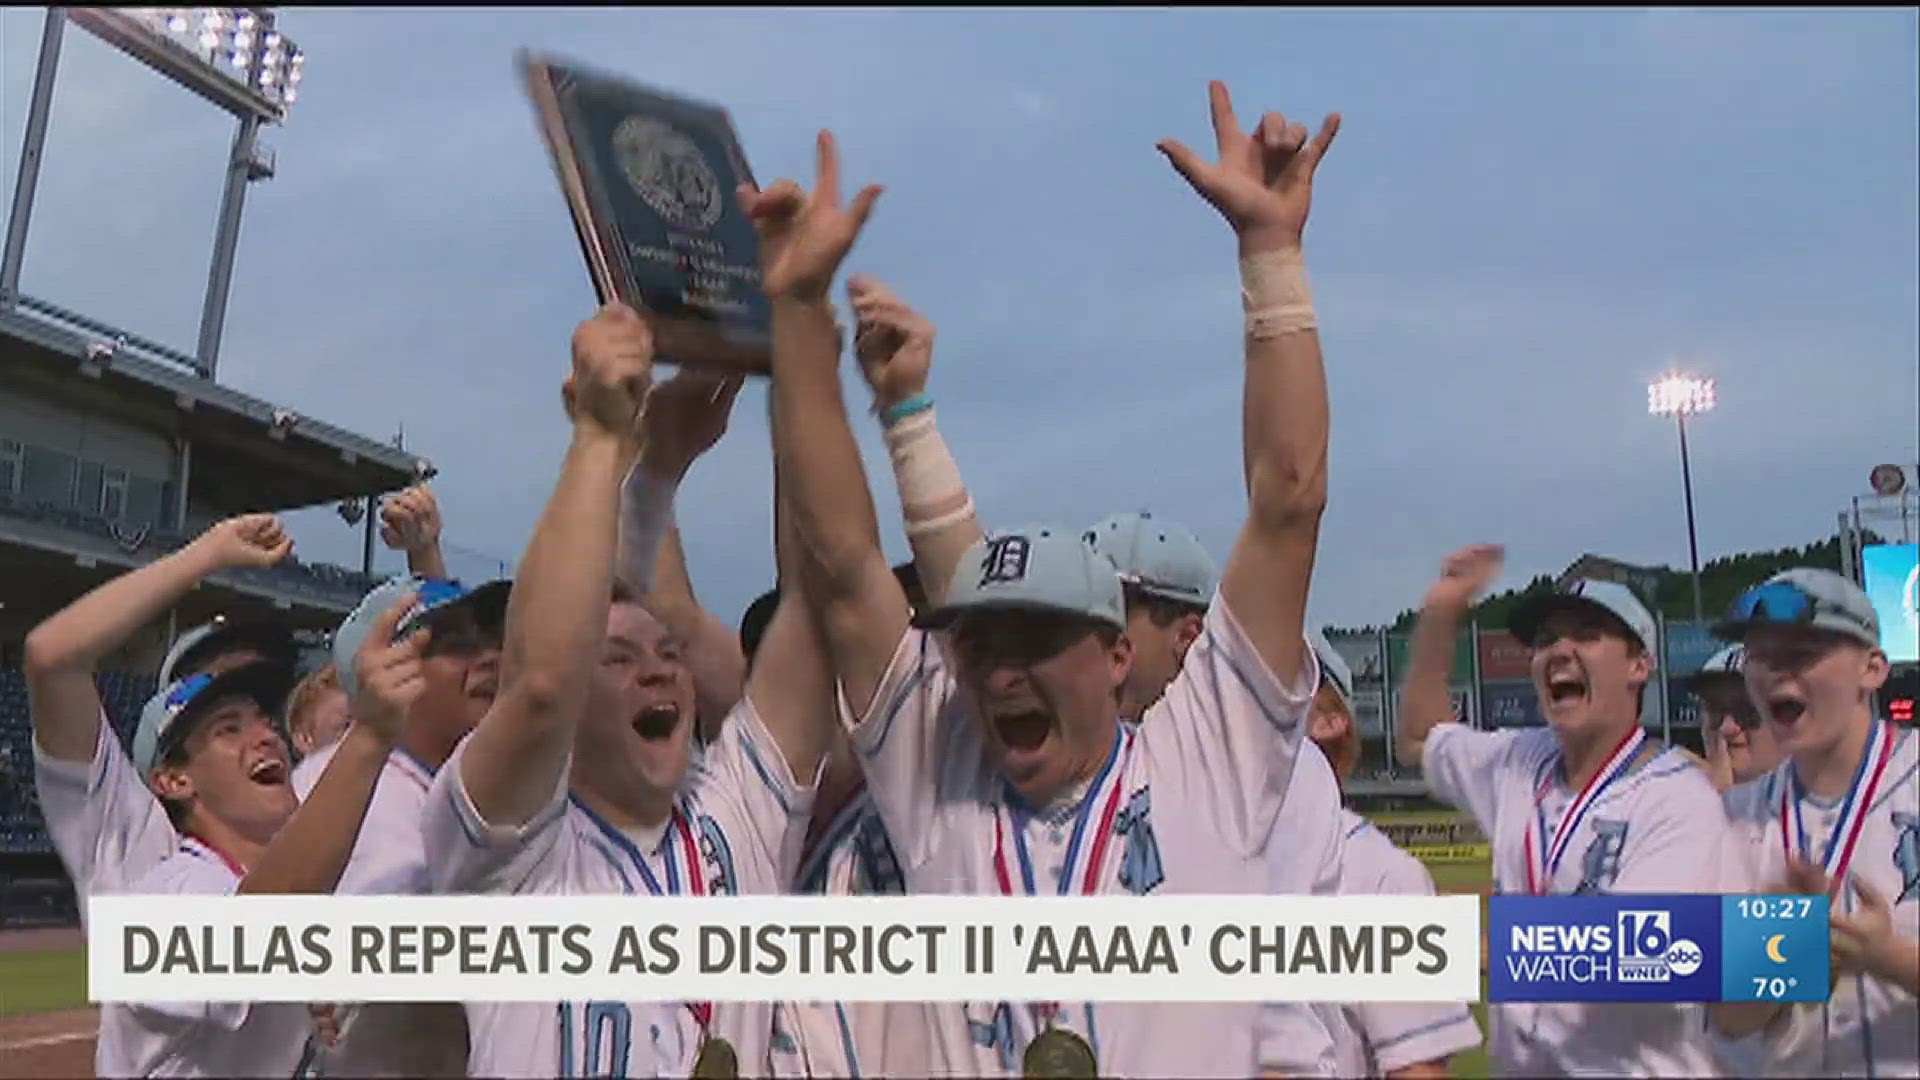 The game was a pitching duel until a walk-off hit earned Dallas a district title